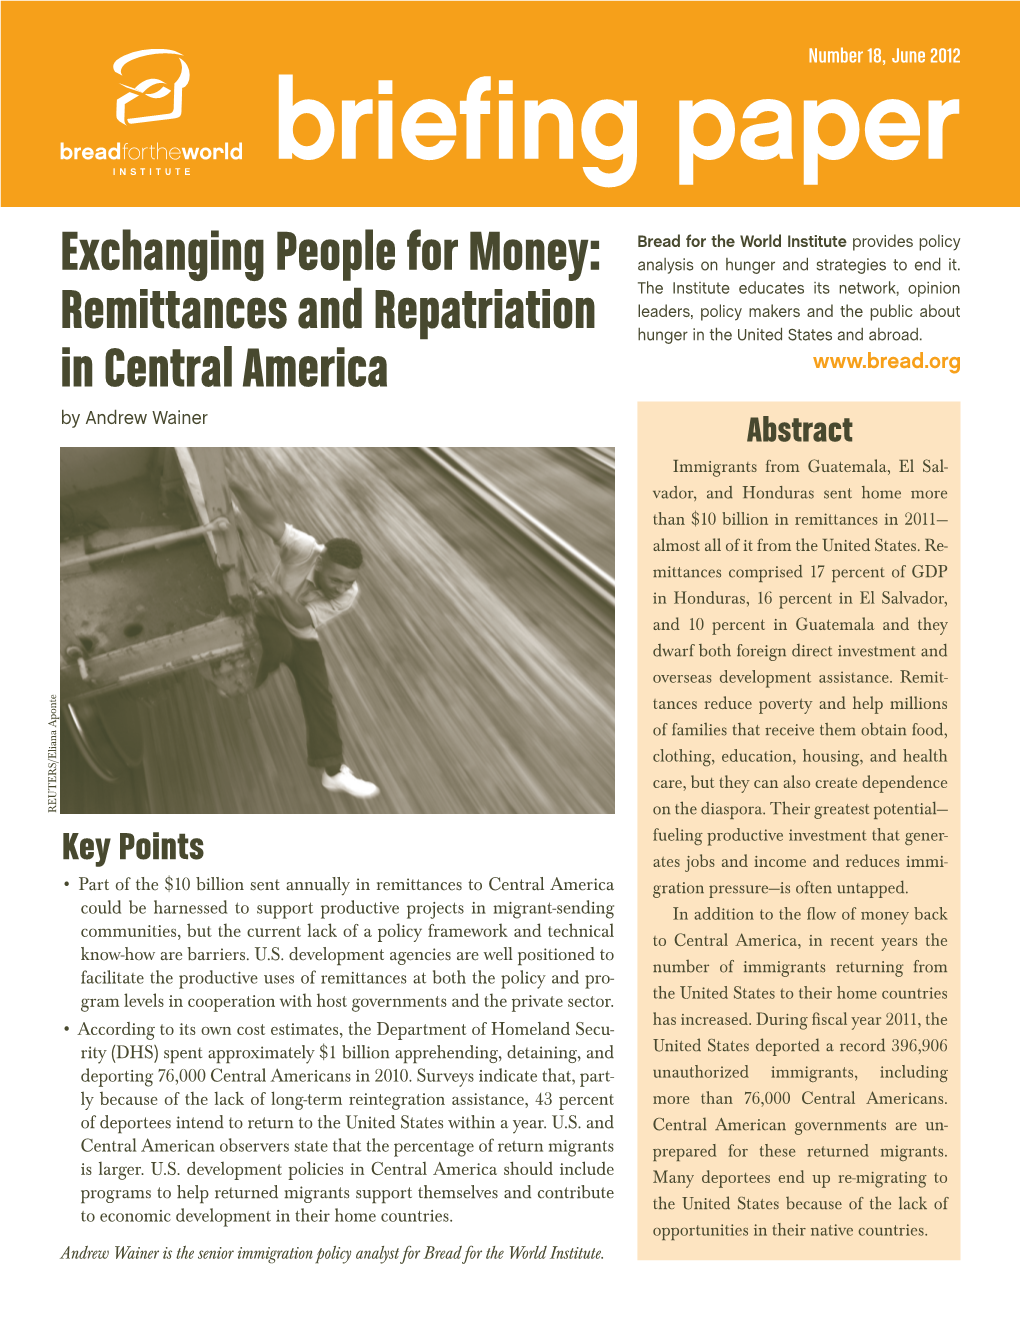 Briefing Paper: Remittances and Repatriation in Central America